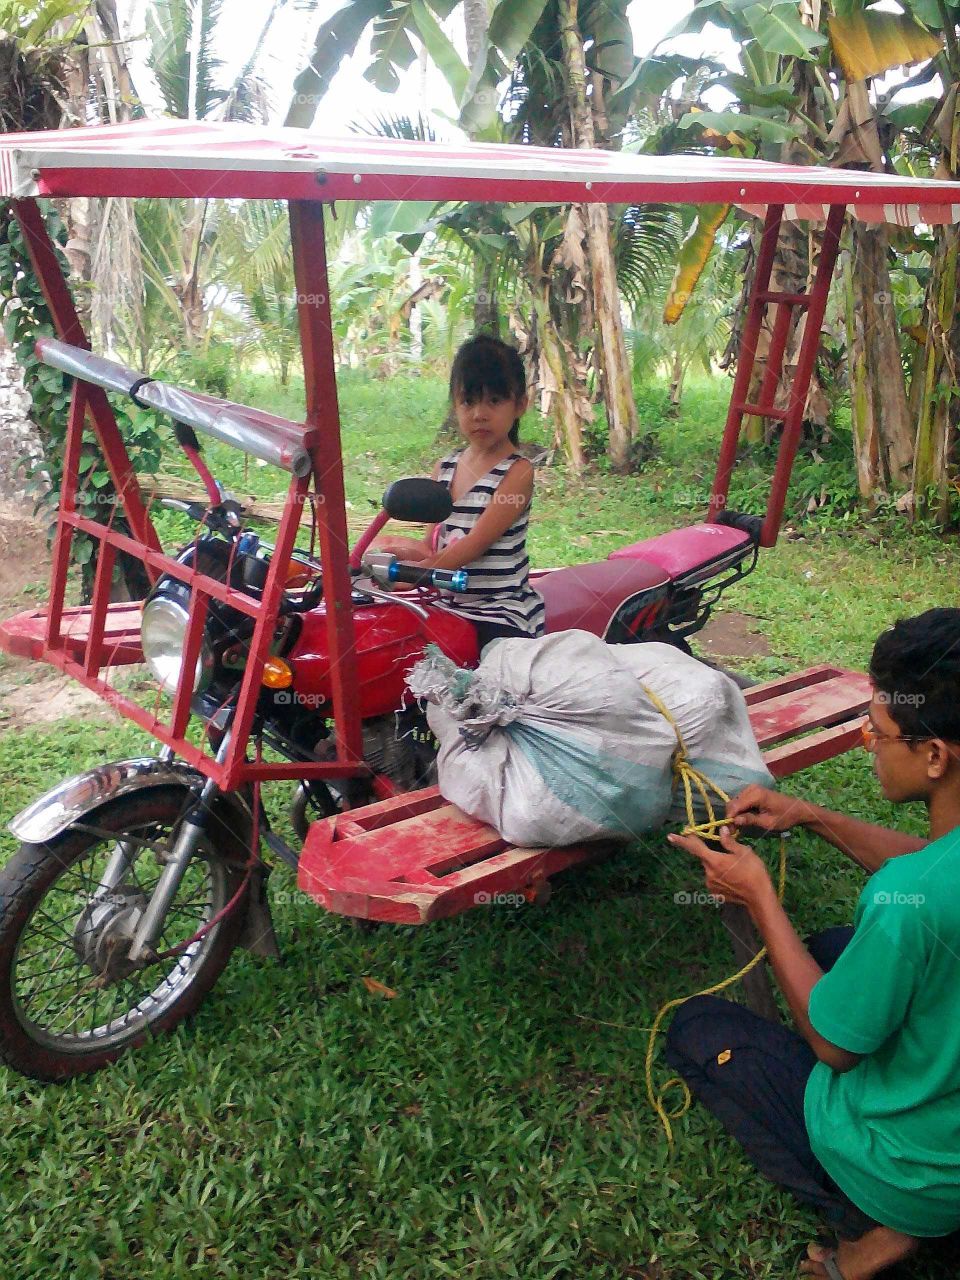 This is a mode of public transportation in some rural areas in the Philippines.